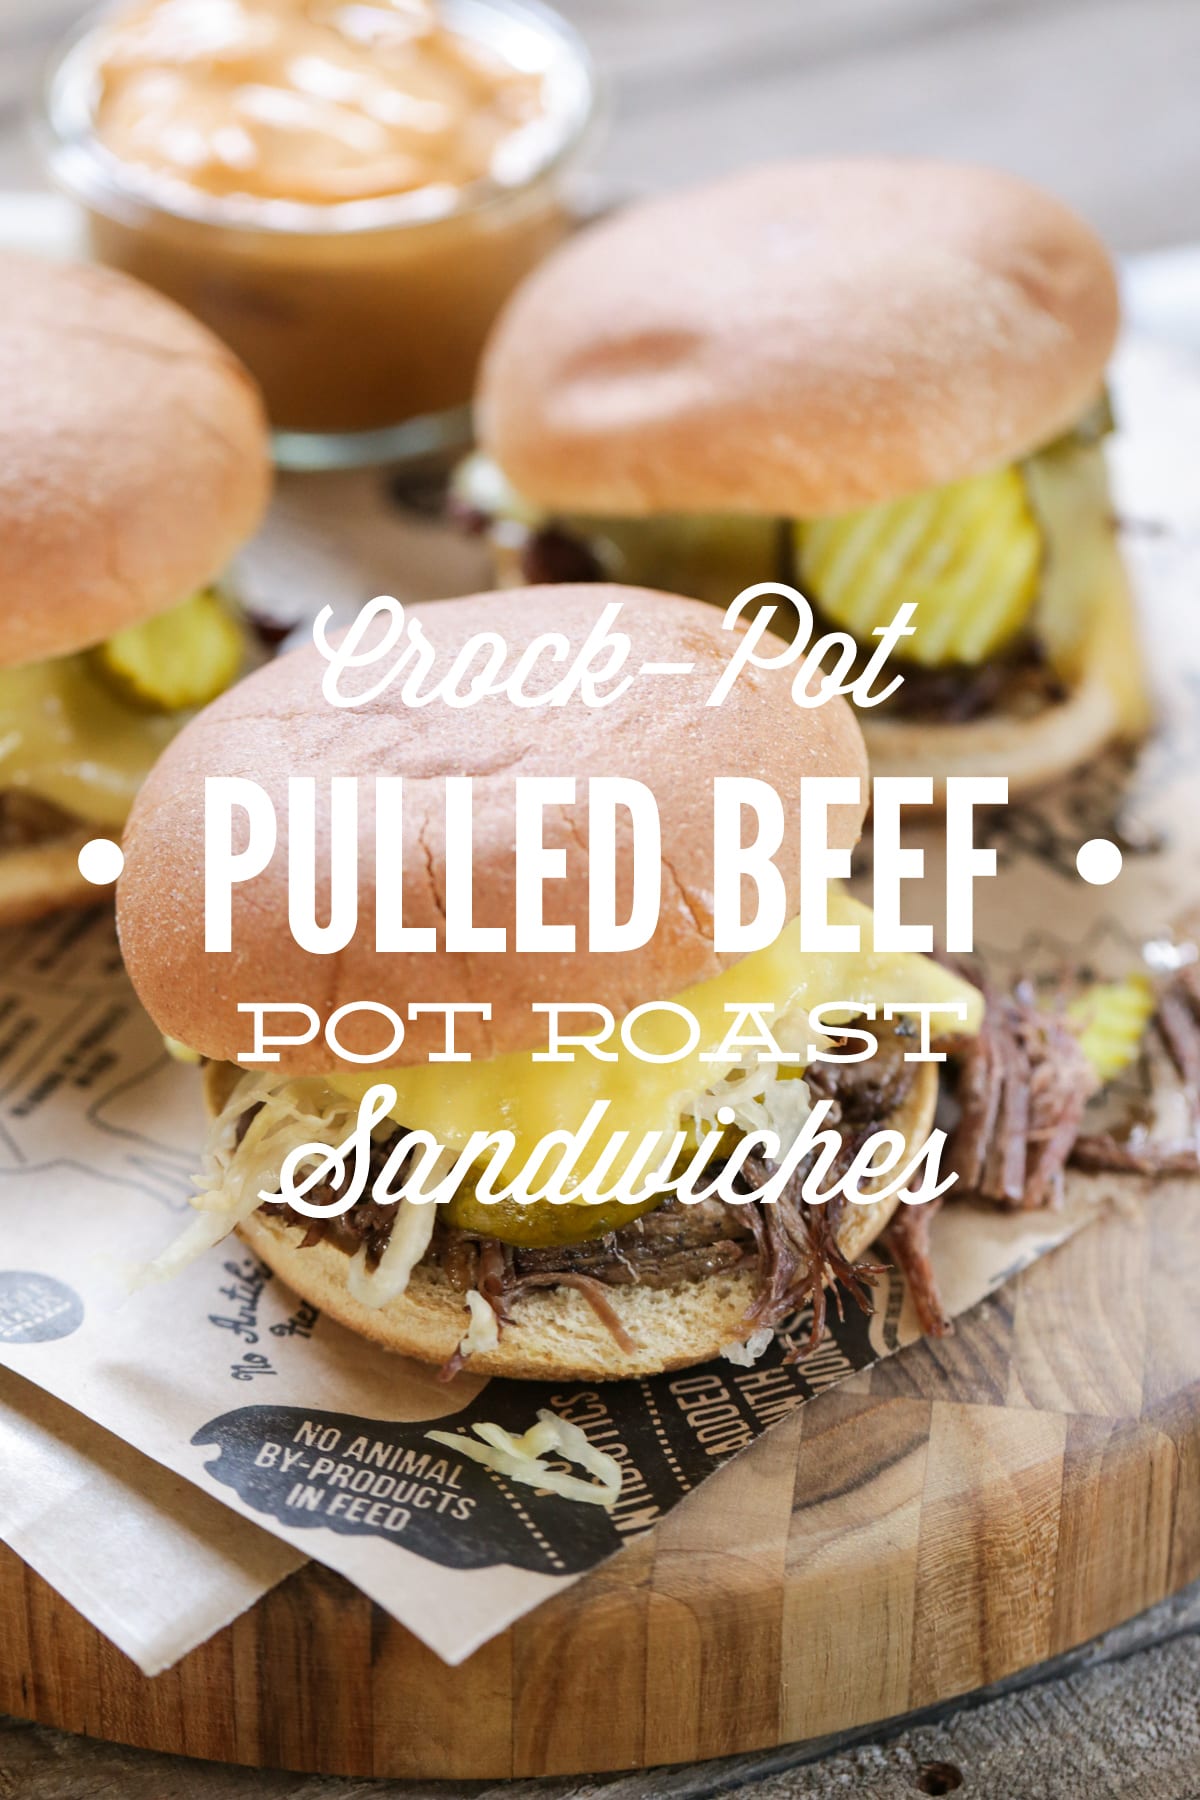 Crock-Pot Pulled Beef Pot Roast Sandwiches - Live Simply